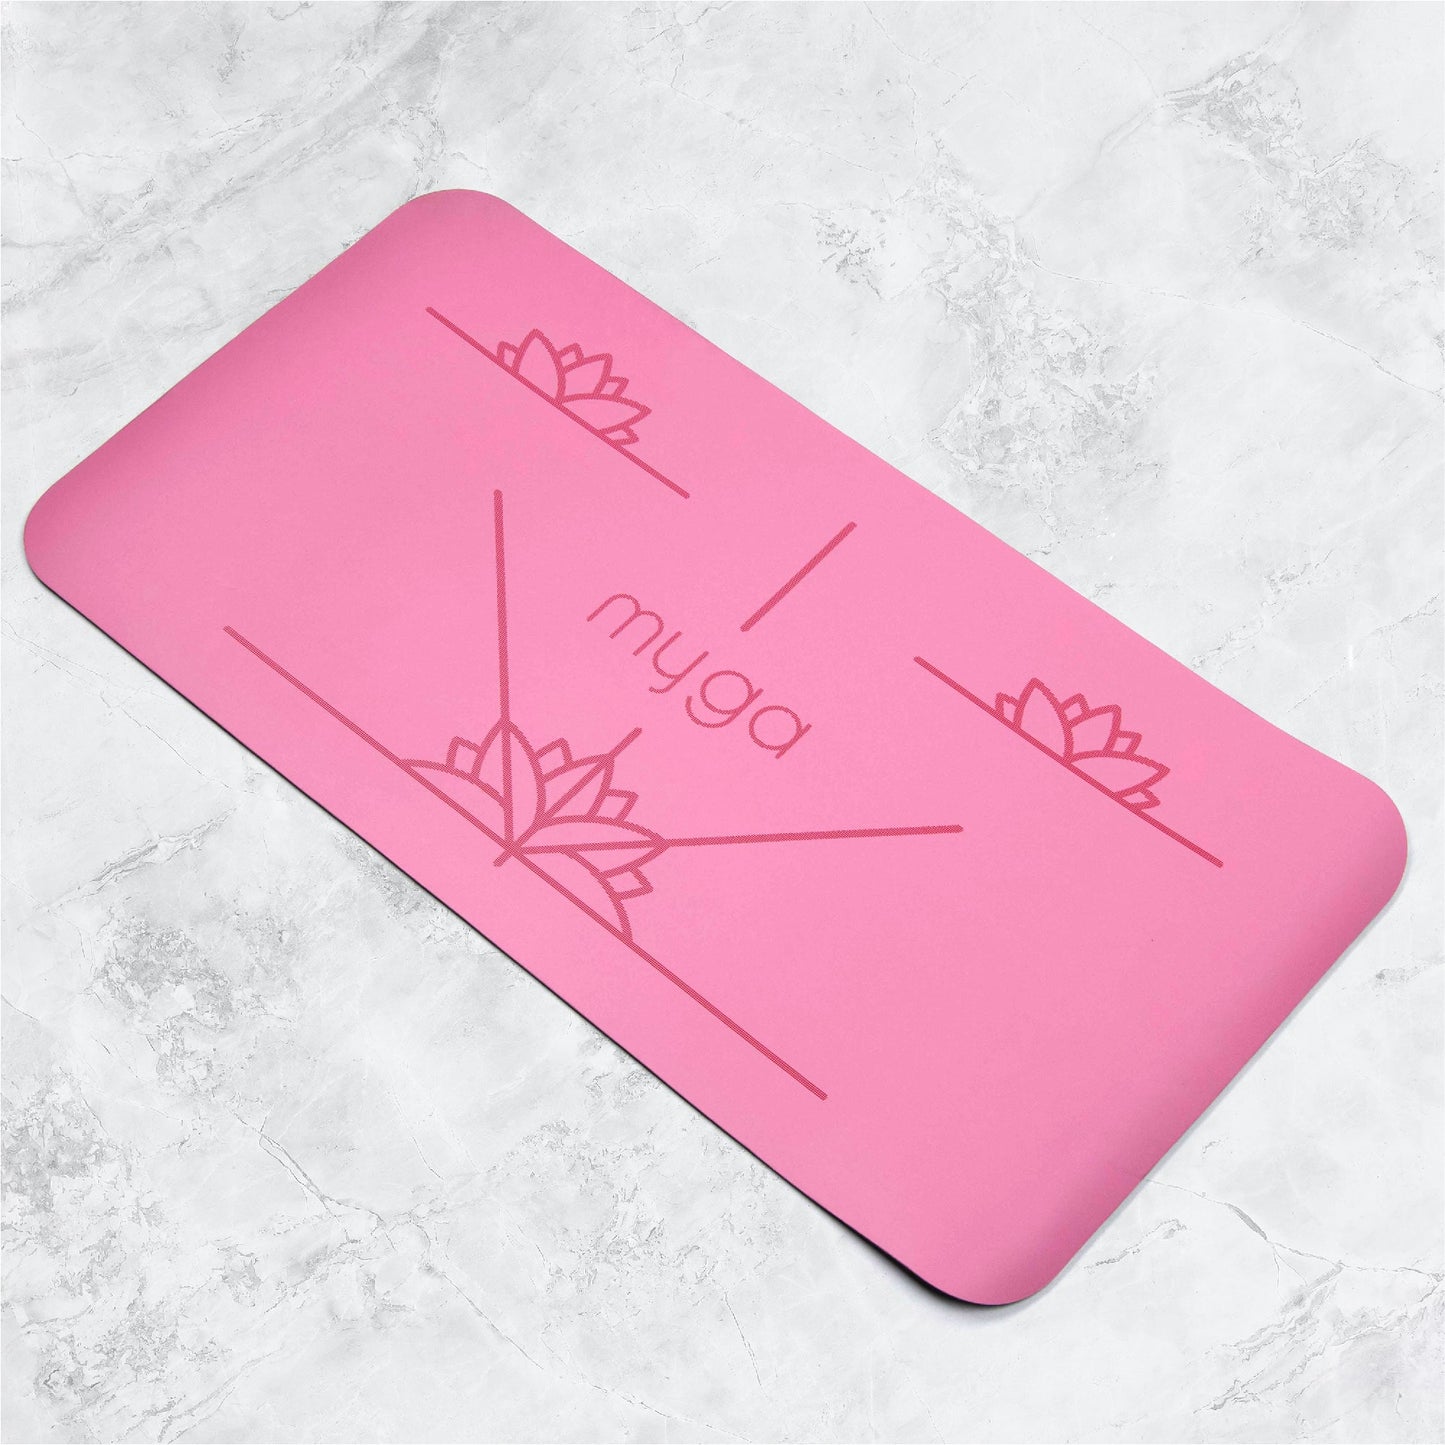 Yoga Support Pad - Pink